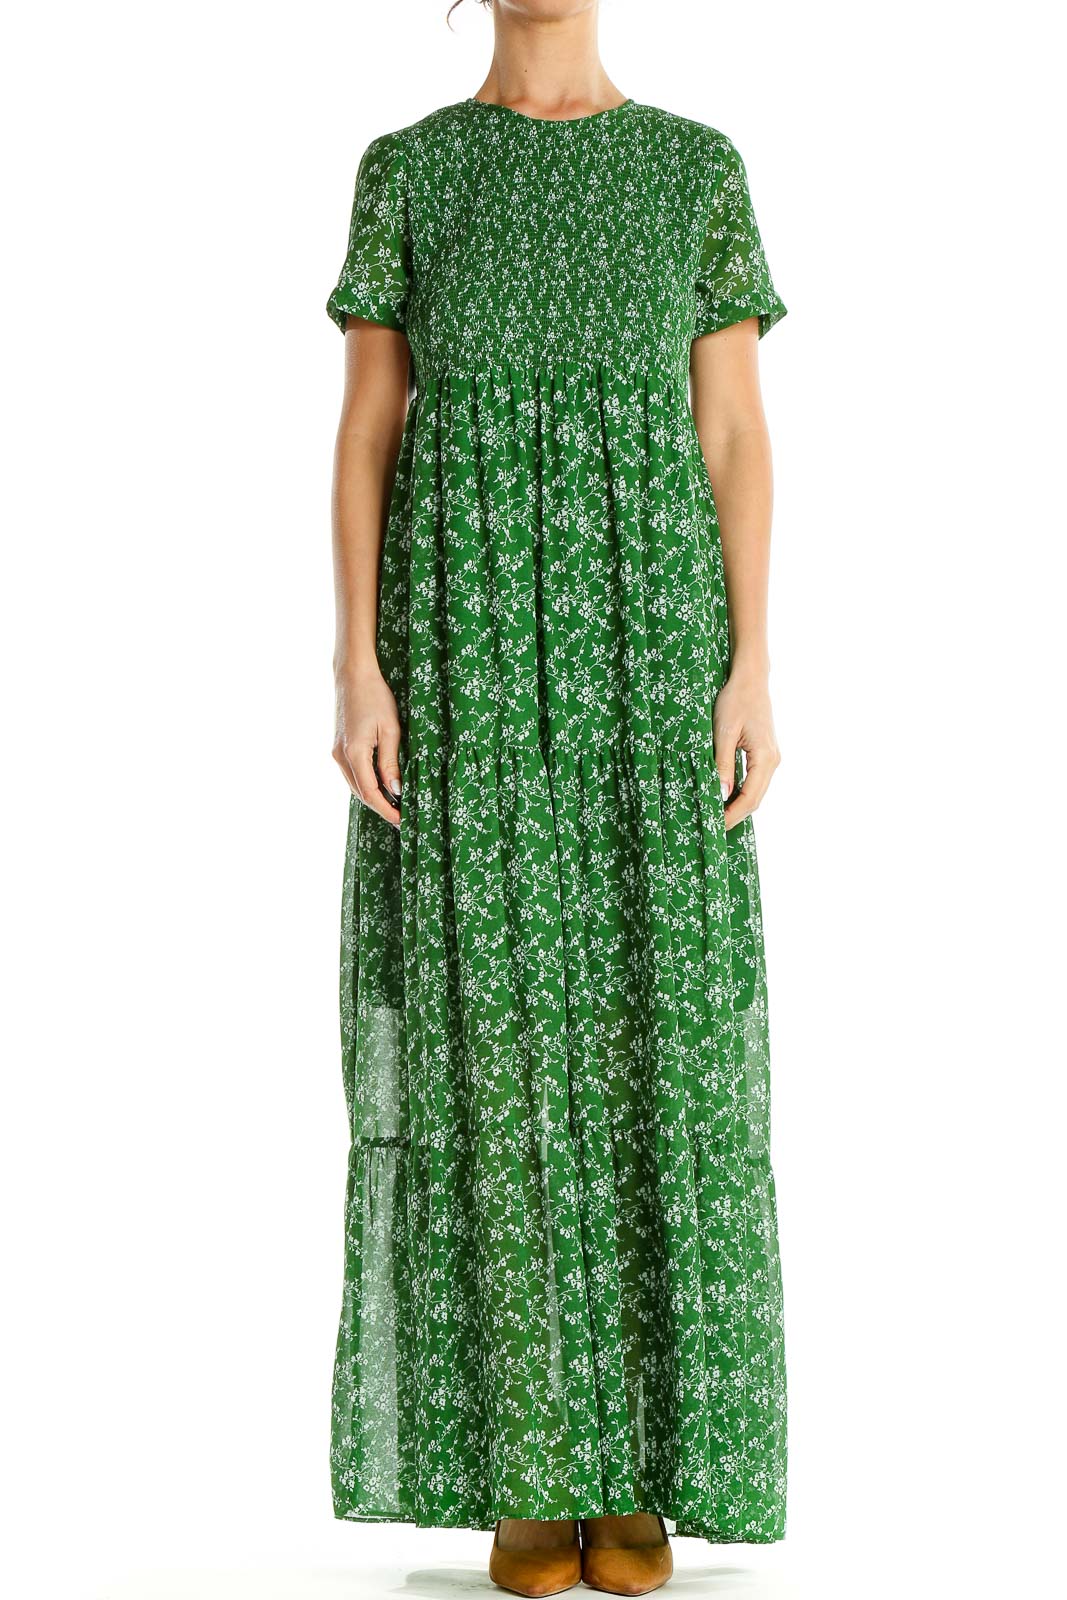 Green Floral Print Tiered Maxi Dress Front